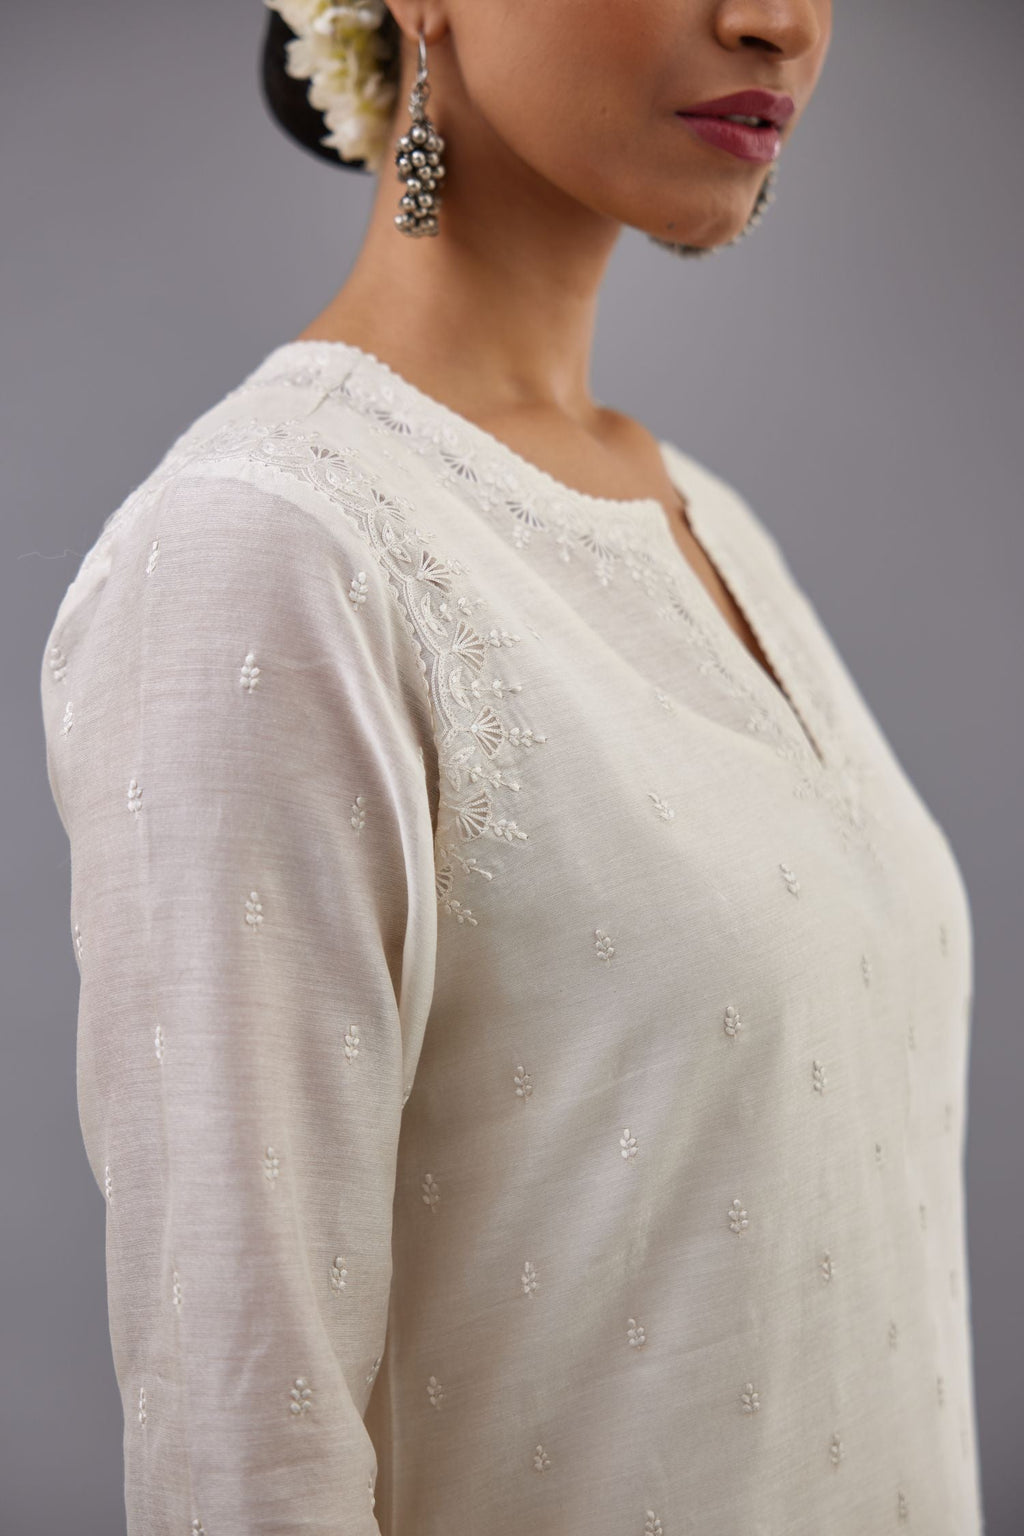 Off white silk chanderi straight kurta with dori and silk thread embroidery at the neck, armholes, hem and sleeve cuffs.